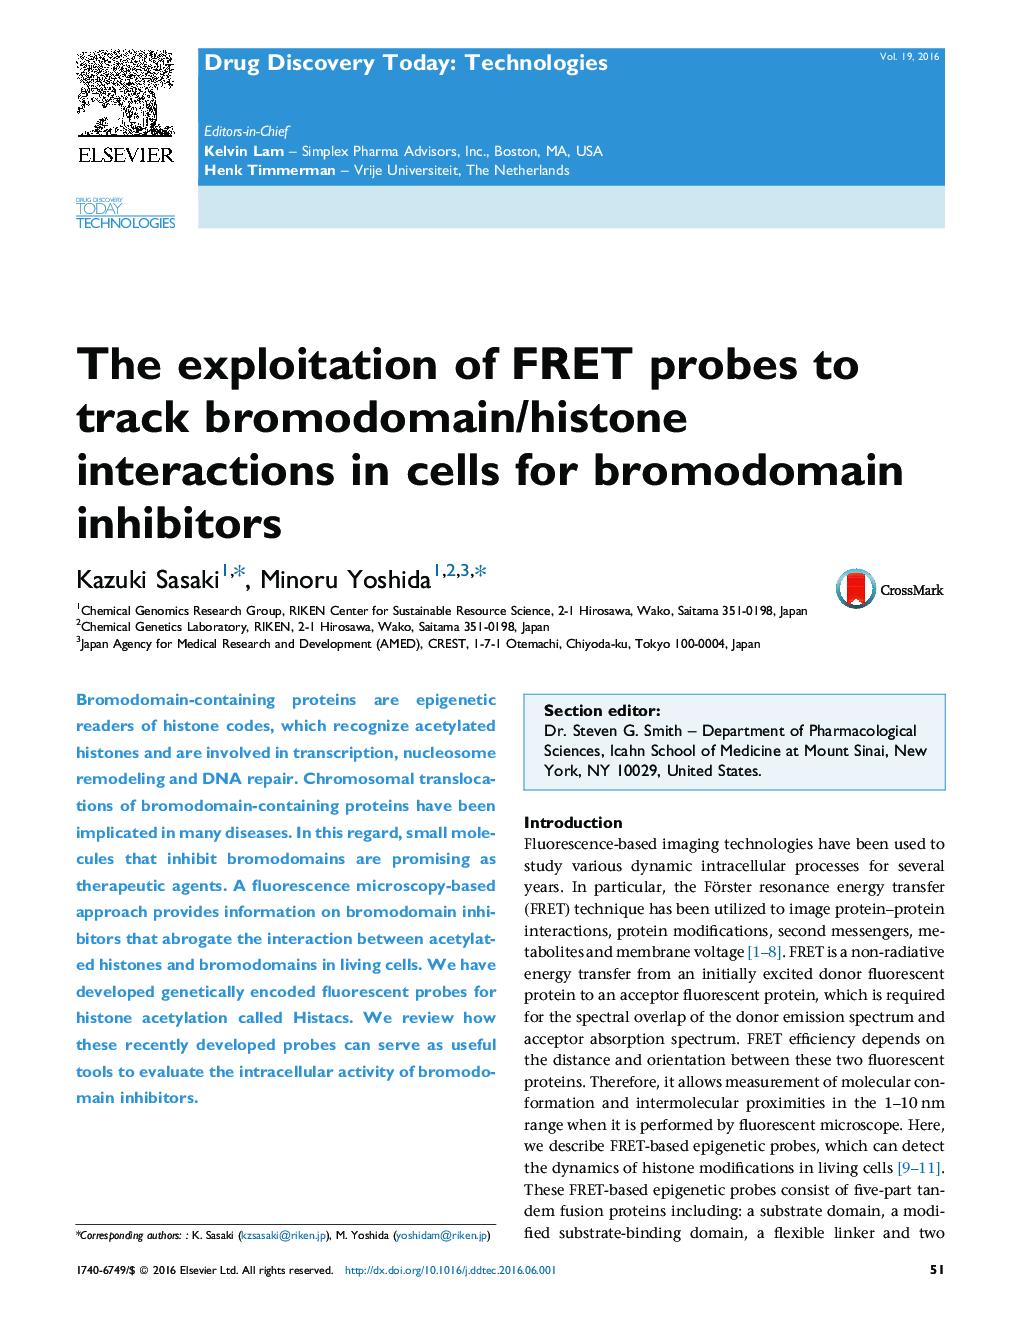 The exploitation of FRET probes to track bromodomain/histone interactions in cells for bromodomain inhibitors